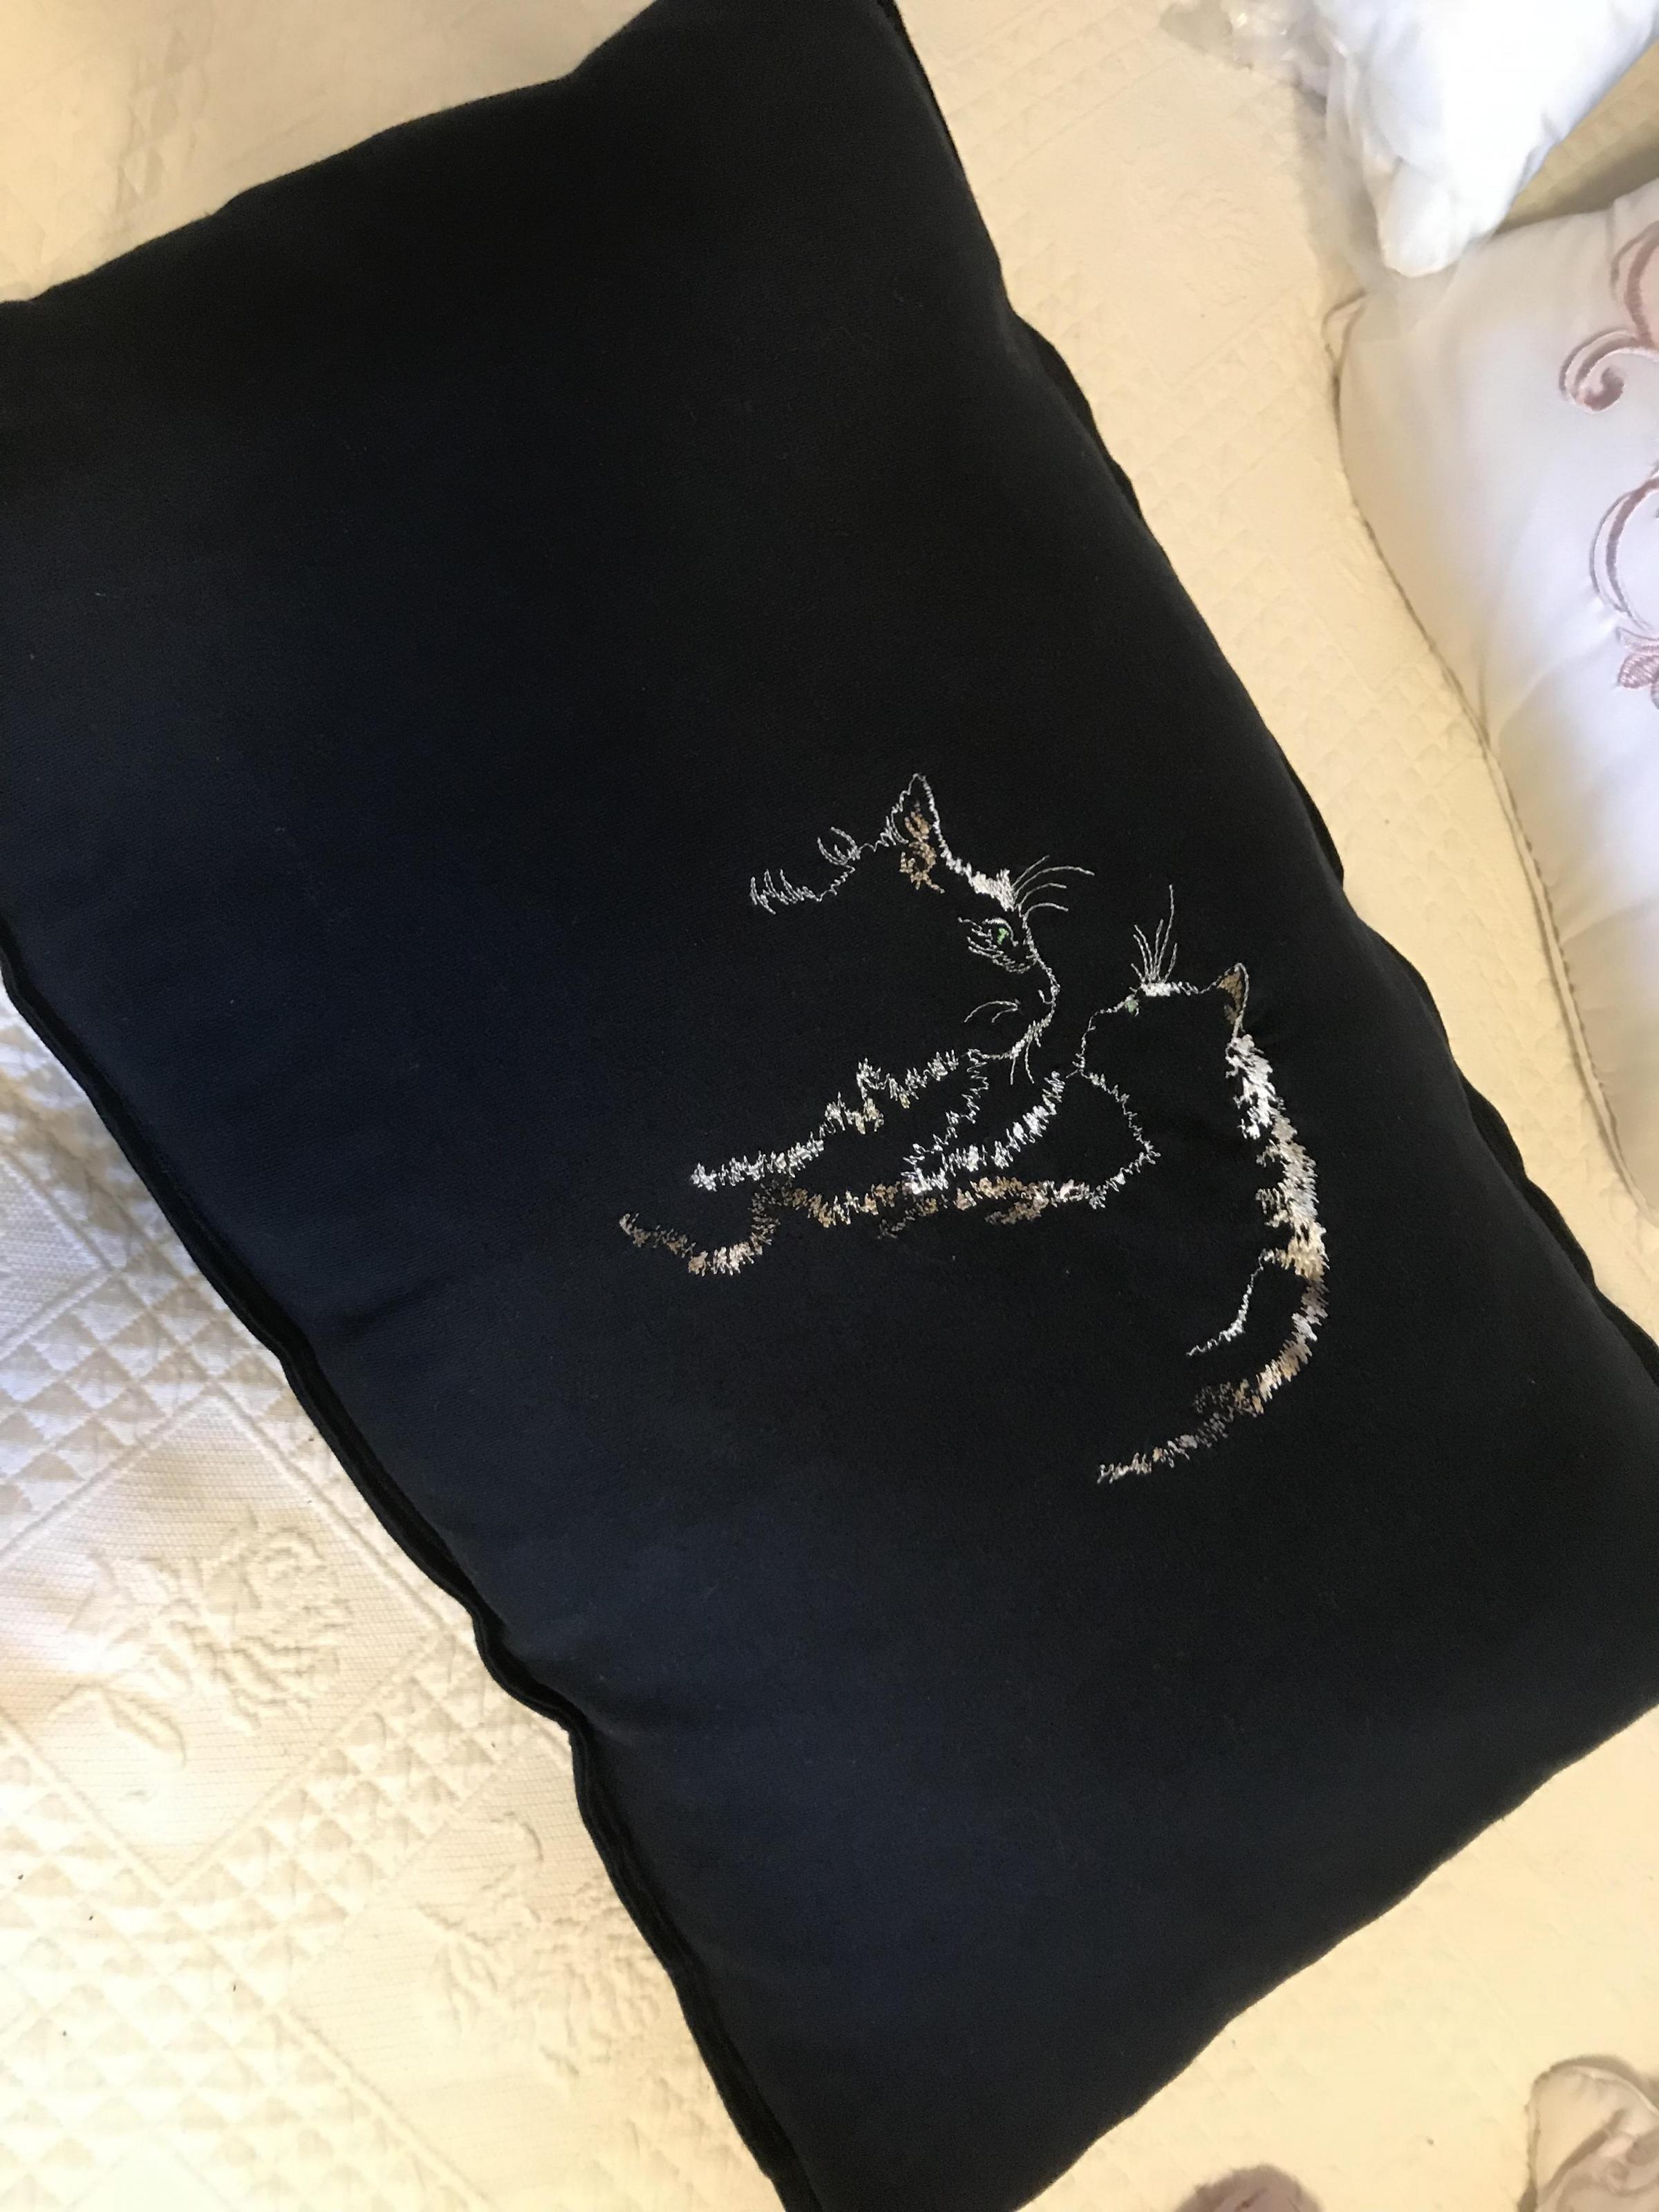 Embroidered cushion with Cats meet design